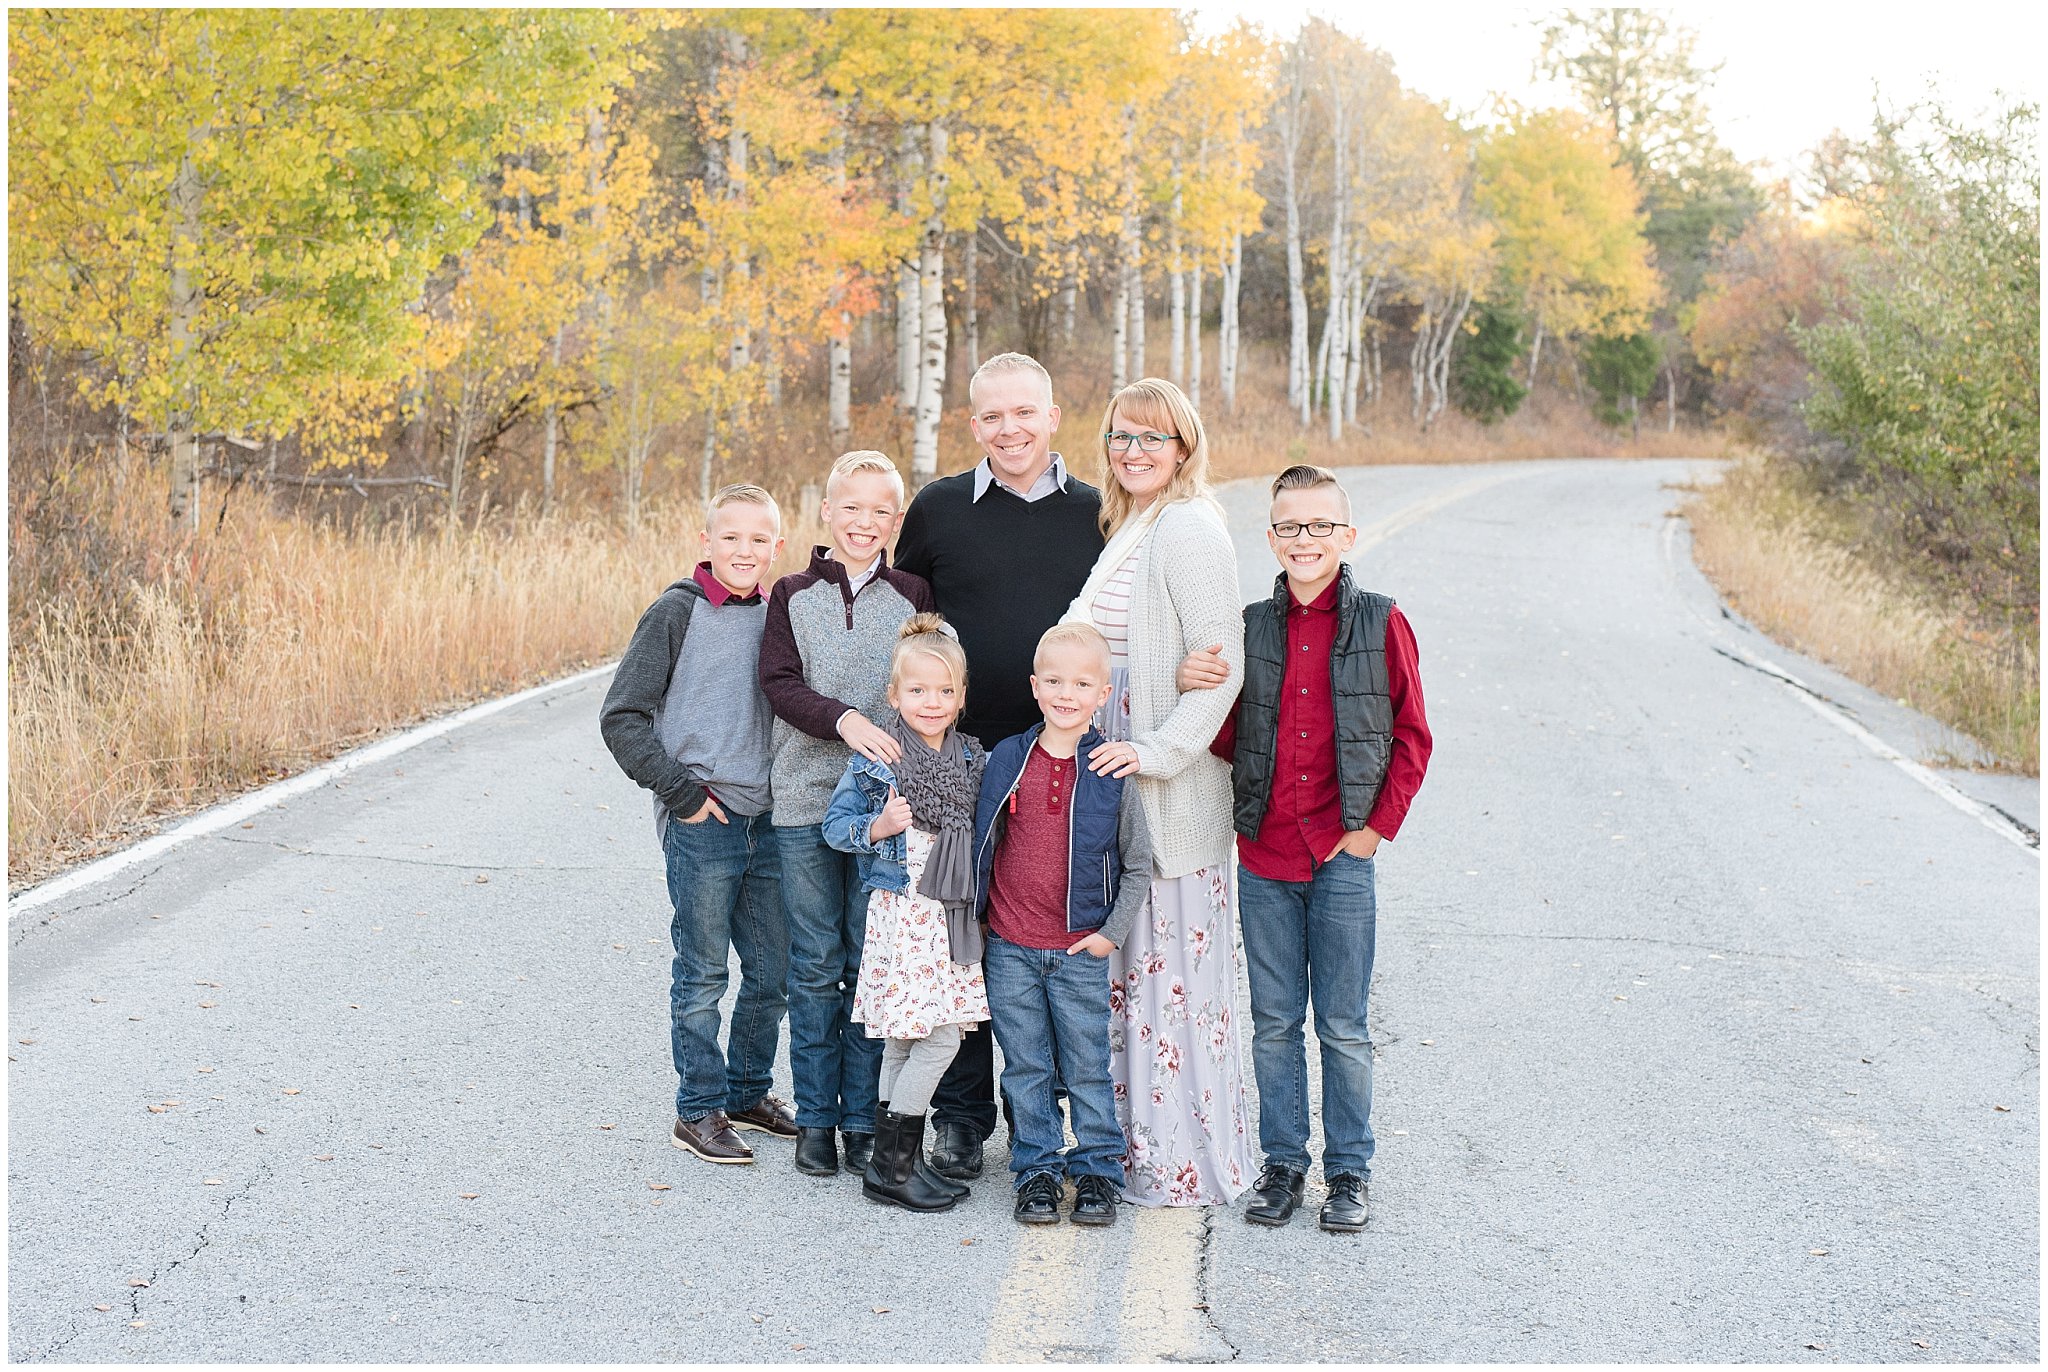 Family smiling on the road with aspen trees in the mountains | Fall Family Pictures in the Mountains | Snowbasin, Utah | Jessie and Dallin Photography